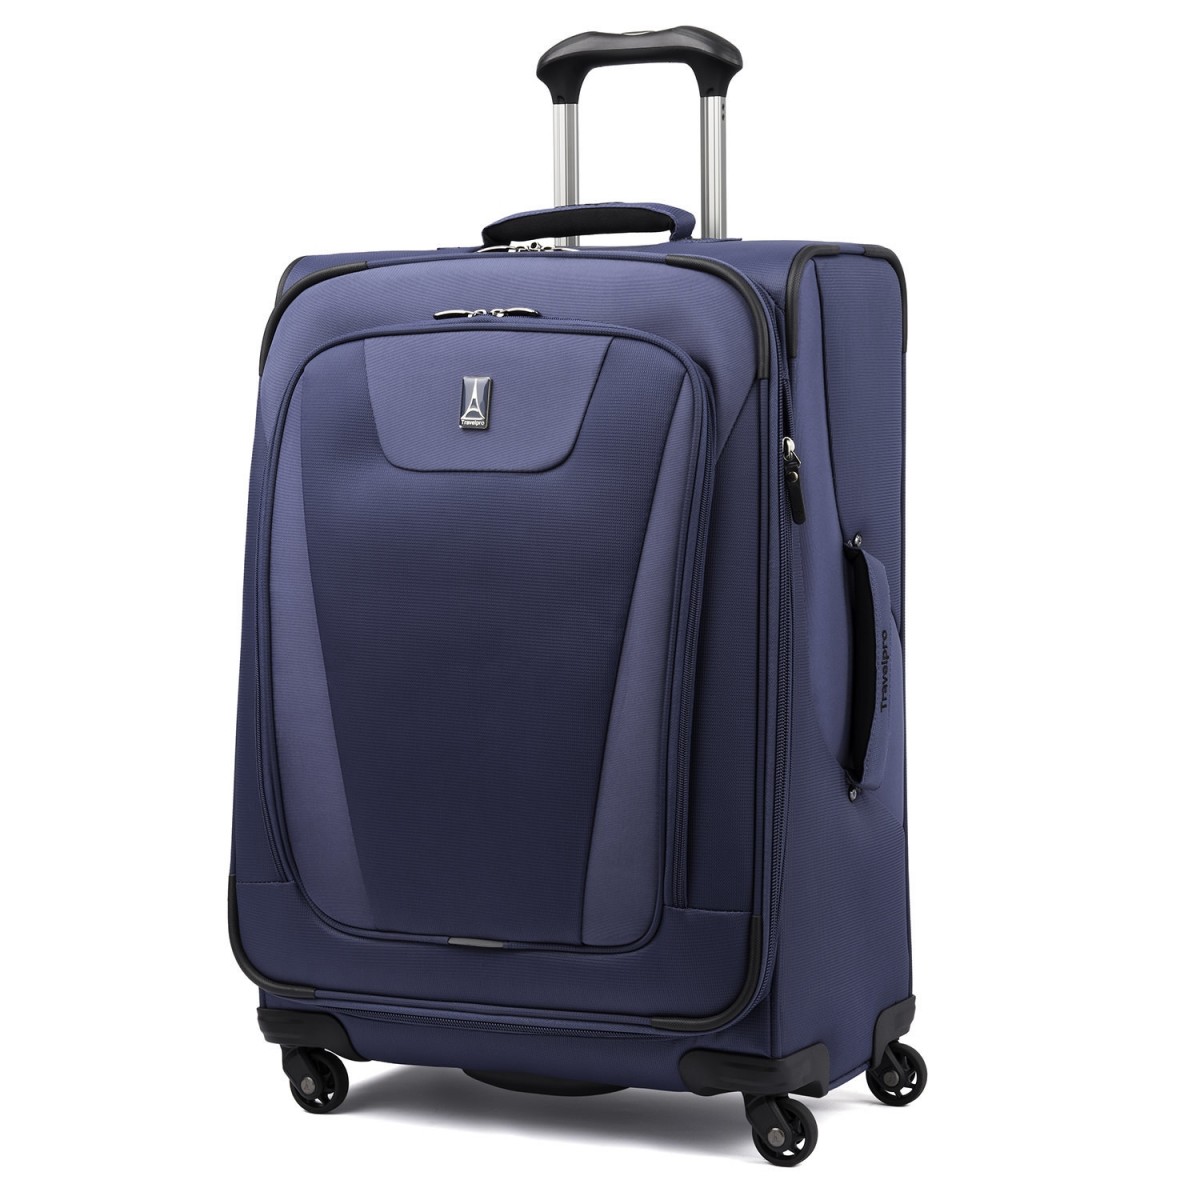 Travelpro Maxlite 4 25" Review (Travelpro Maxlite 4 Expandable 25 Inch Spinner Suitcase)